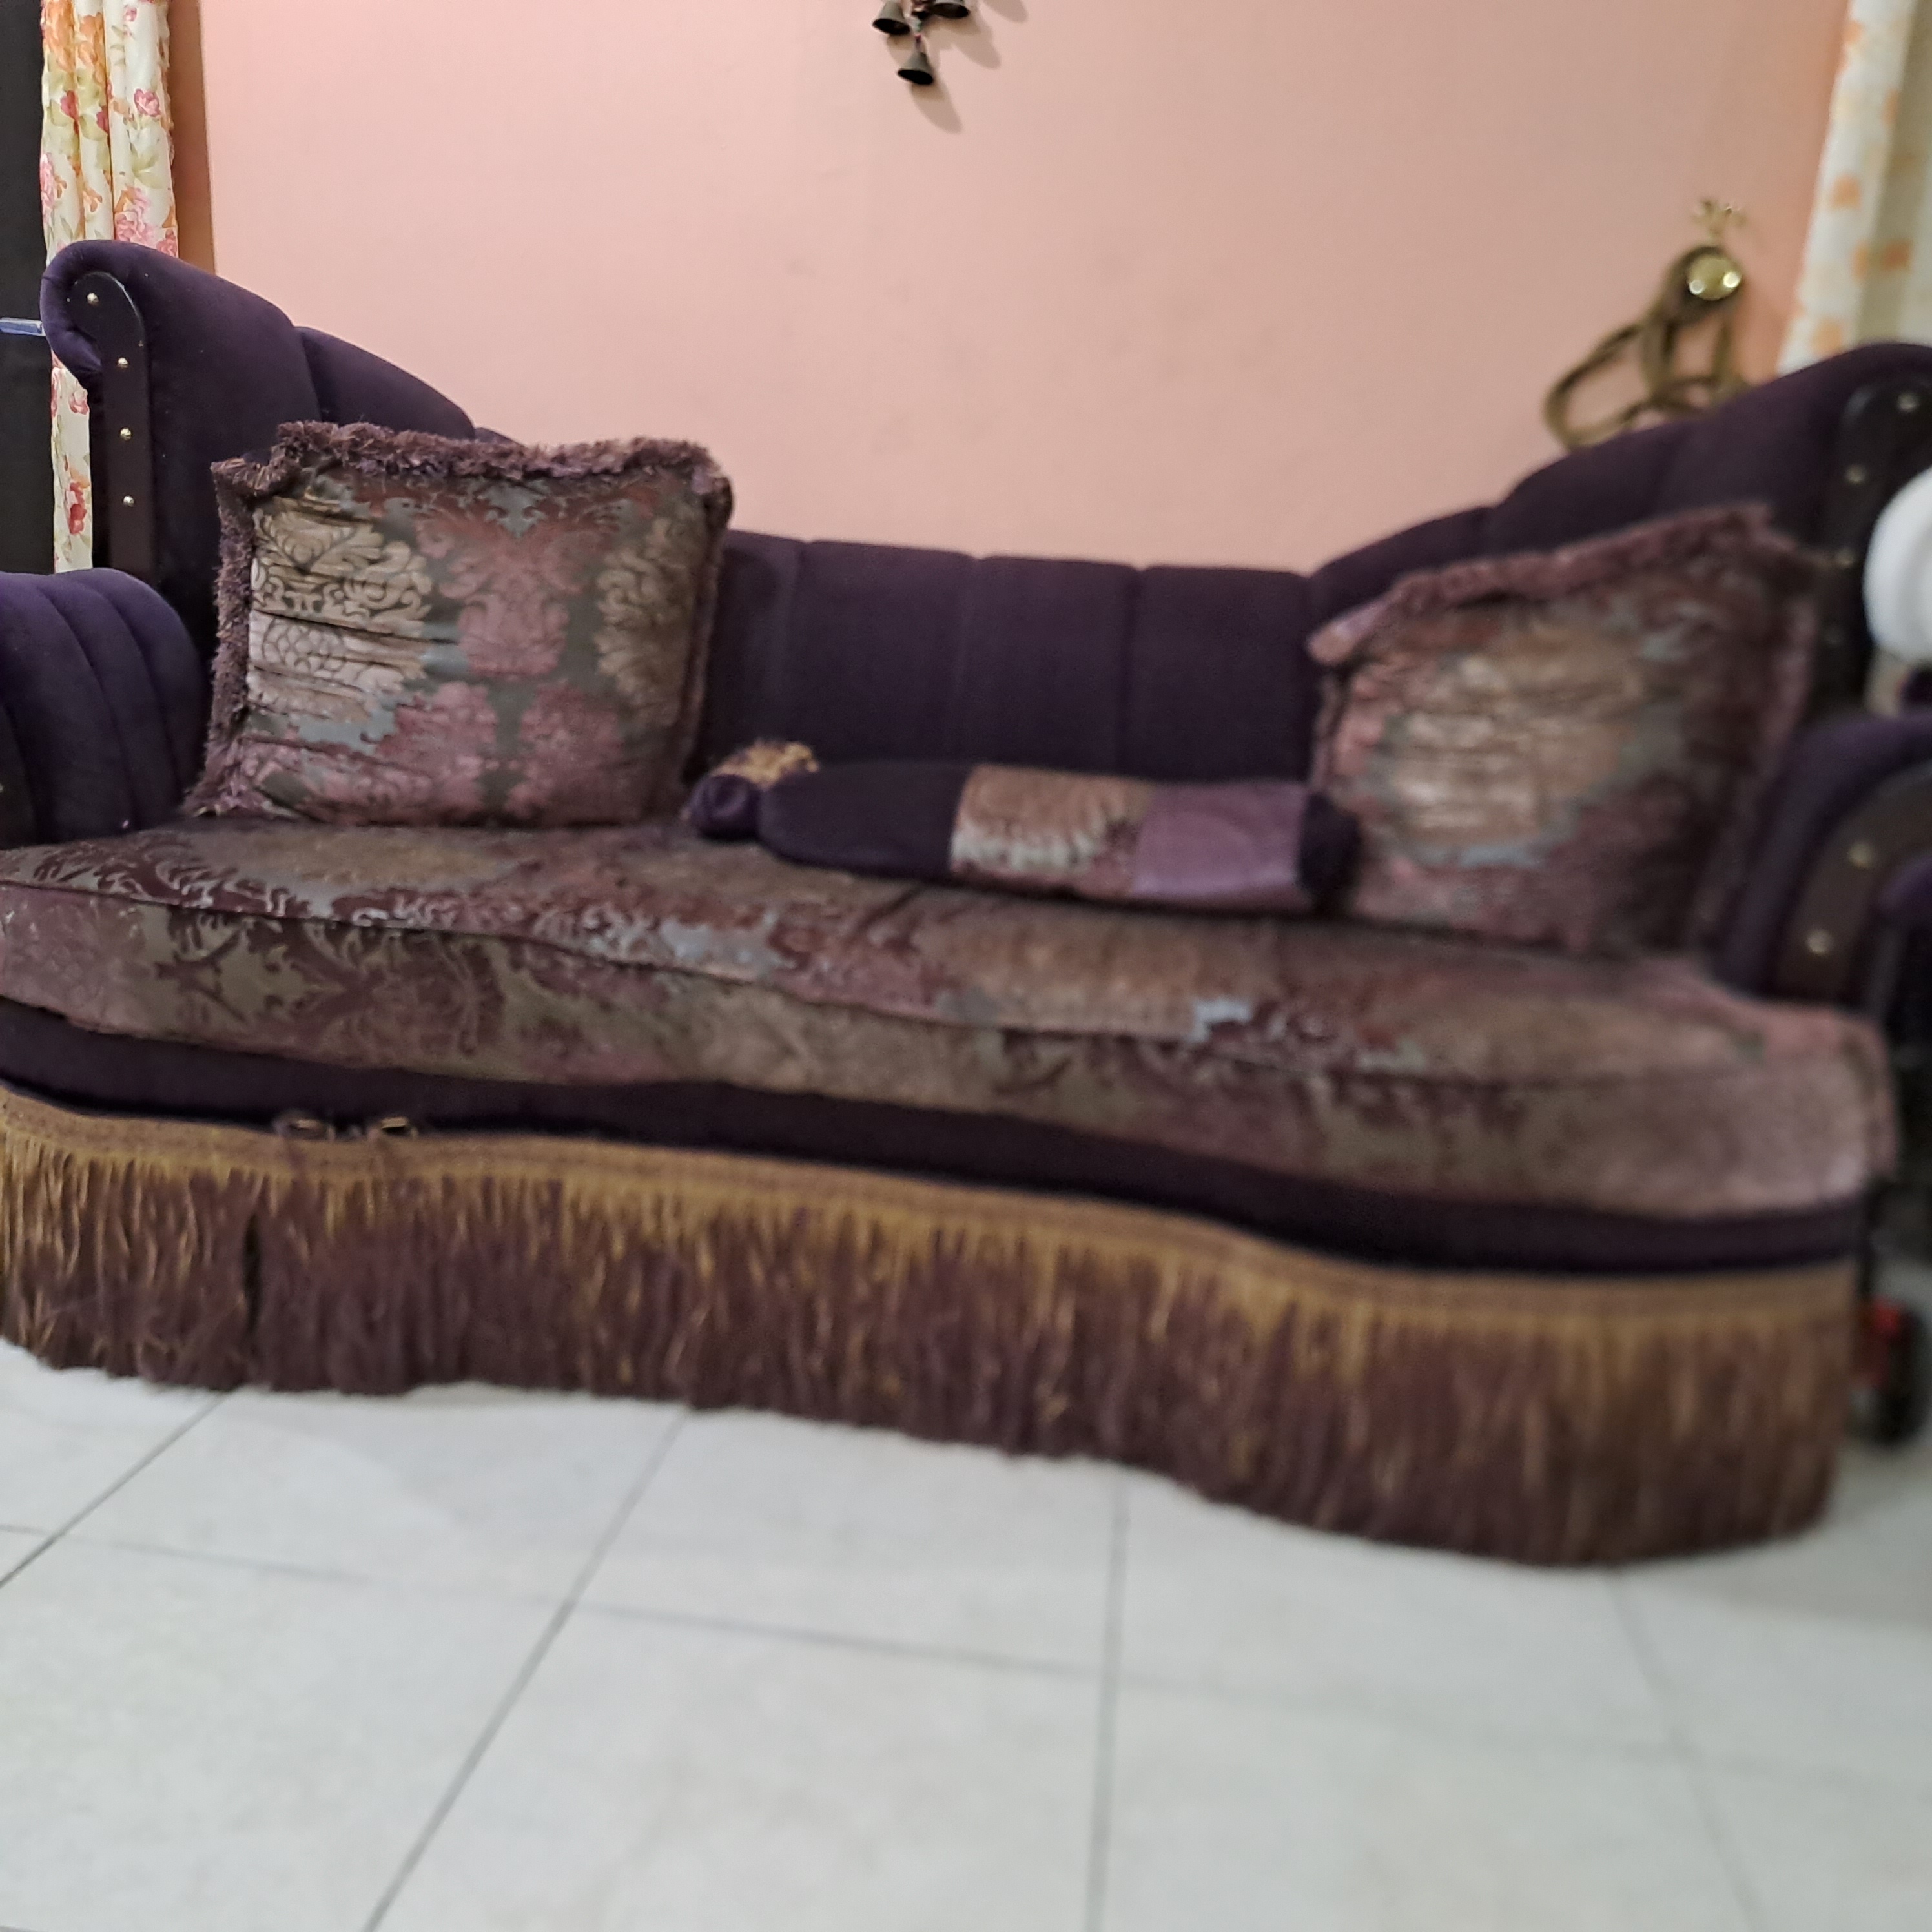 Sofa(velvet) available for sale, 2 piece 6 kd only 